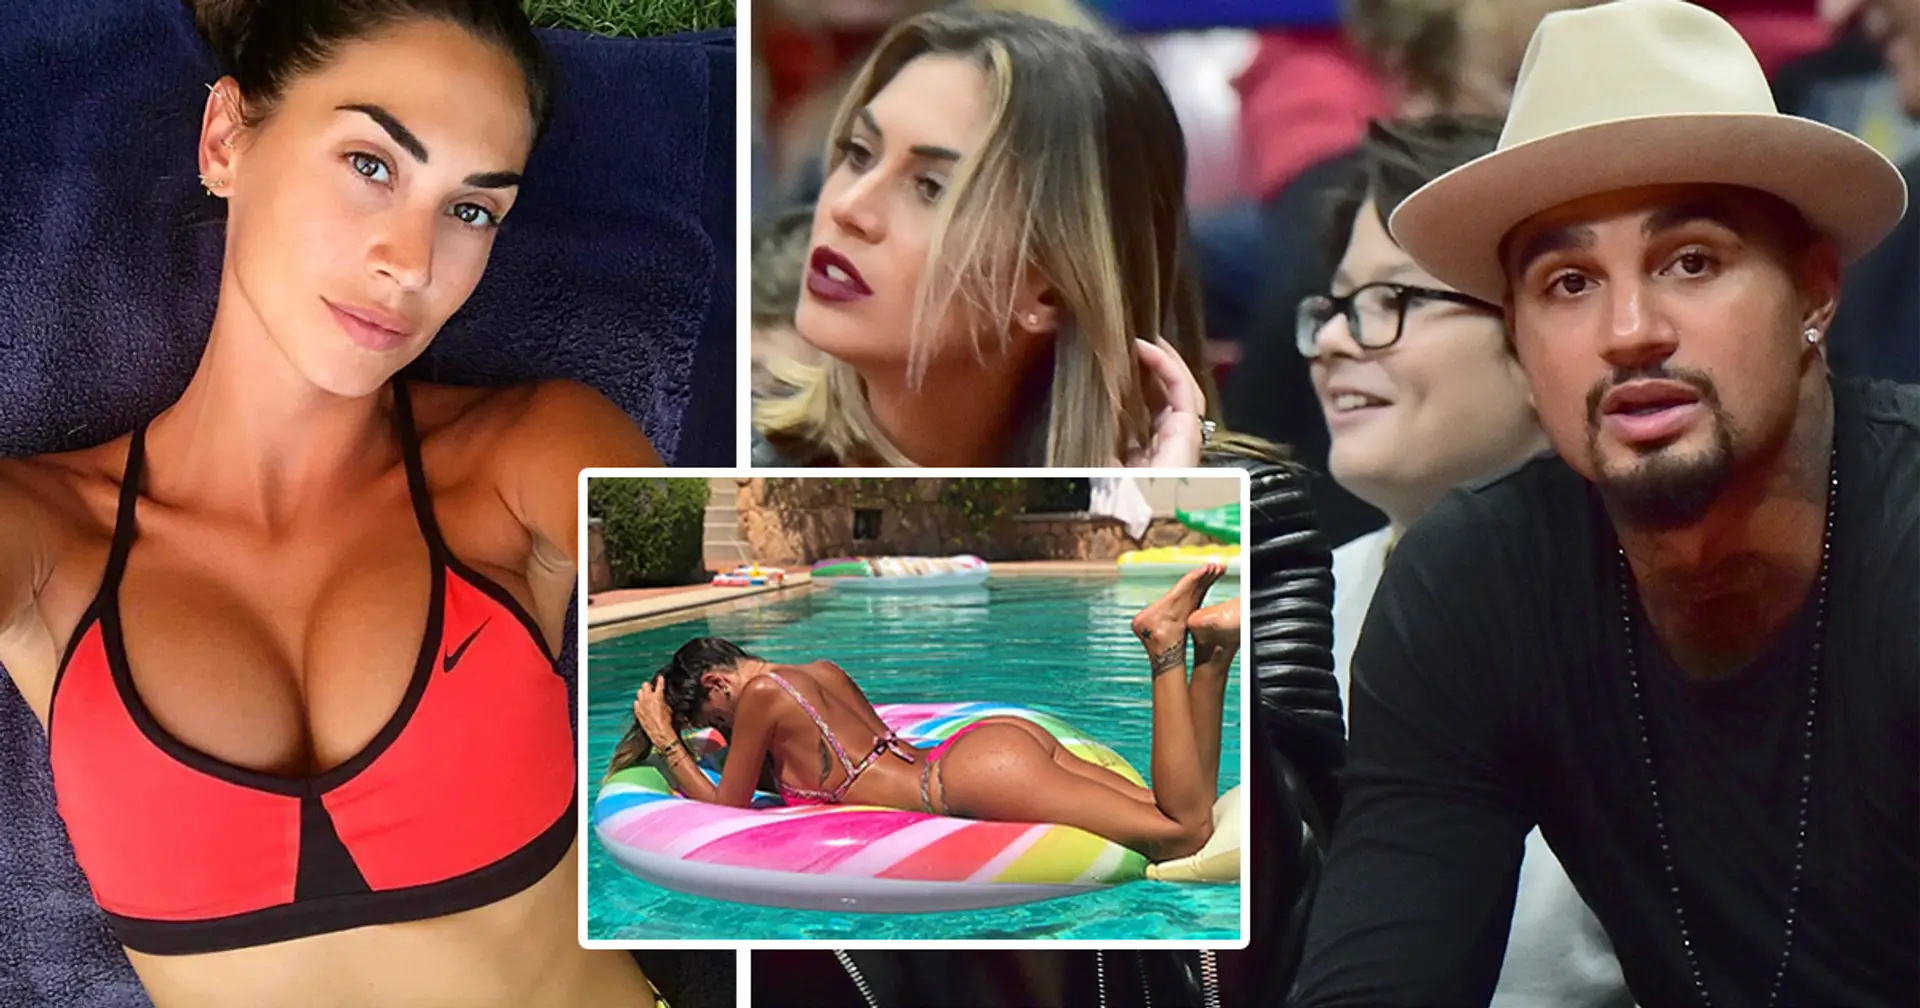 Kevin-Prince Boateng's ex wife claimed he was always injured because they had 'sex 7-10 times a week'